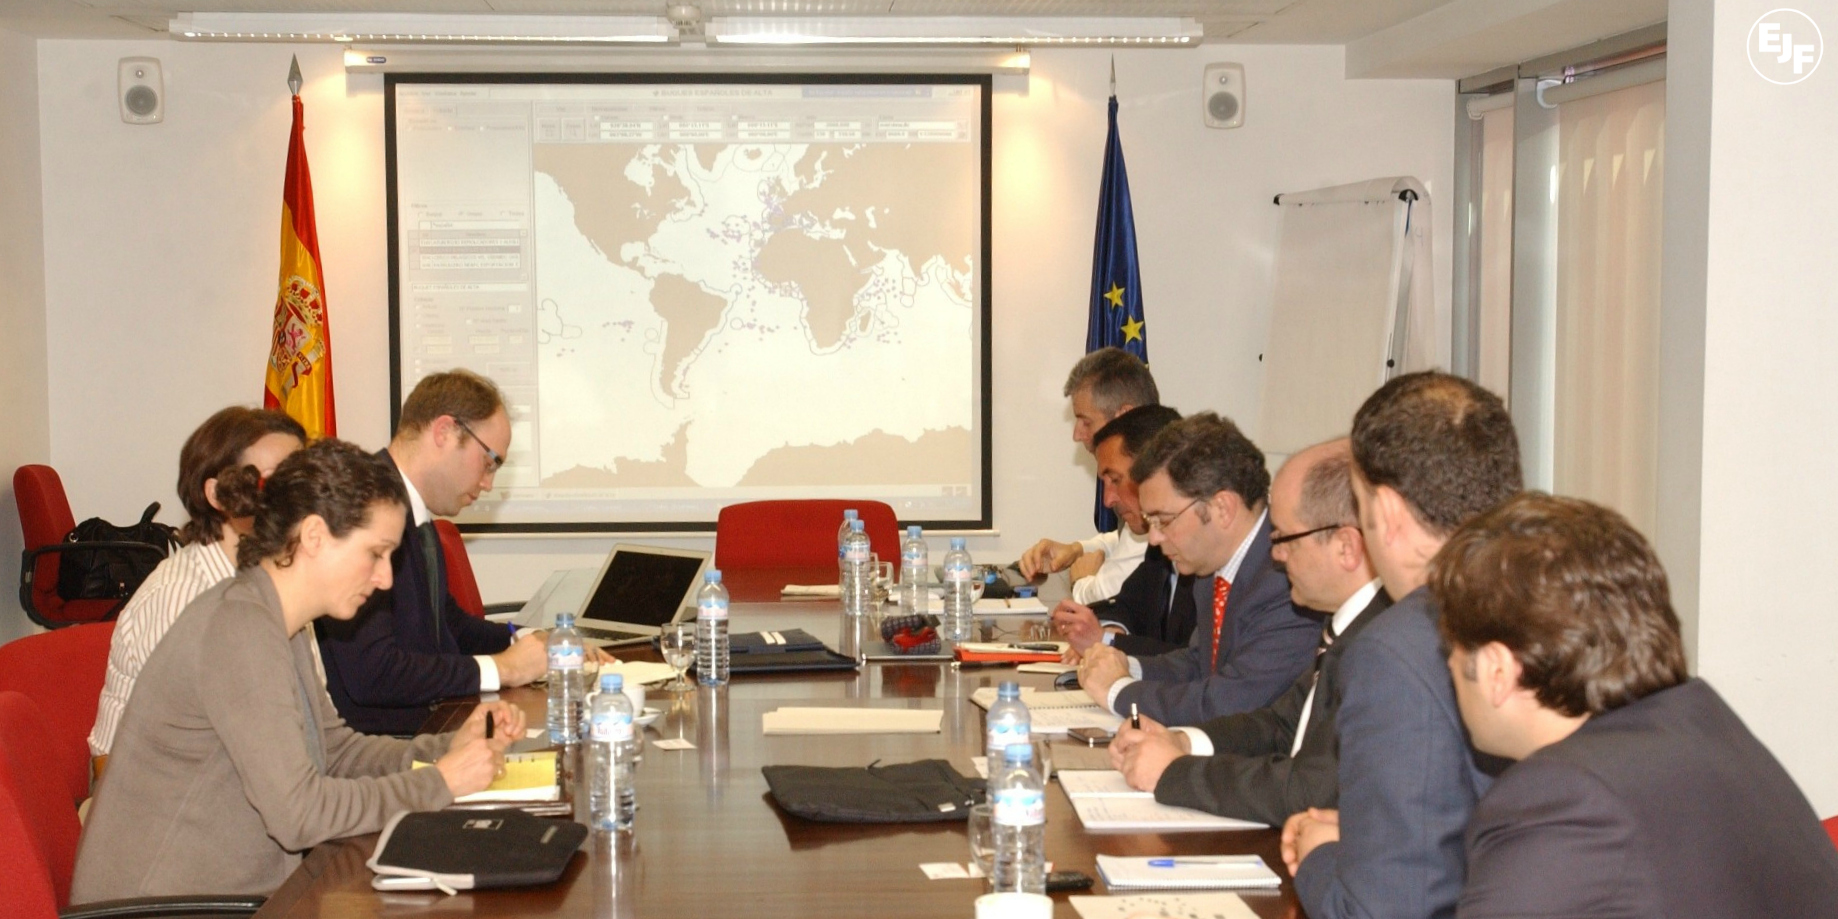 EJF met with the Spanish Government this week to discuss actions to combat pirate fishing